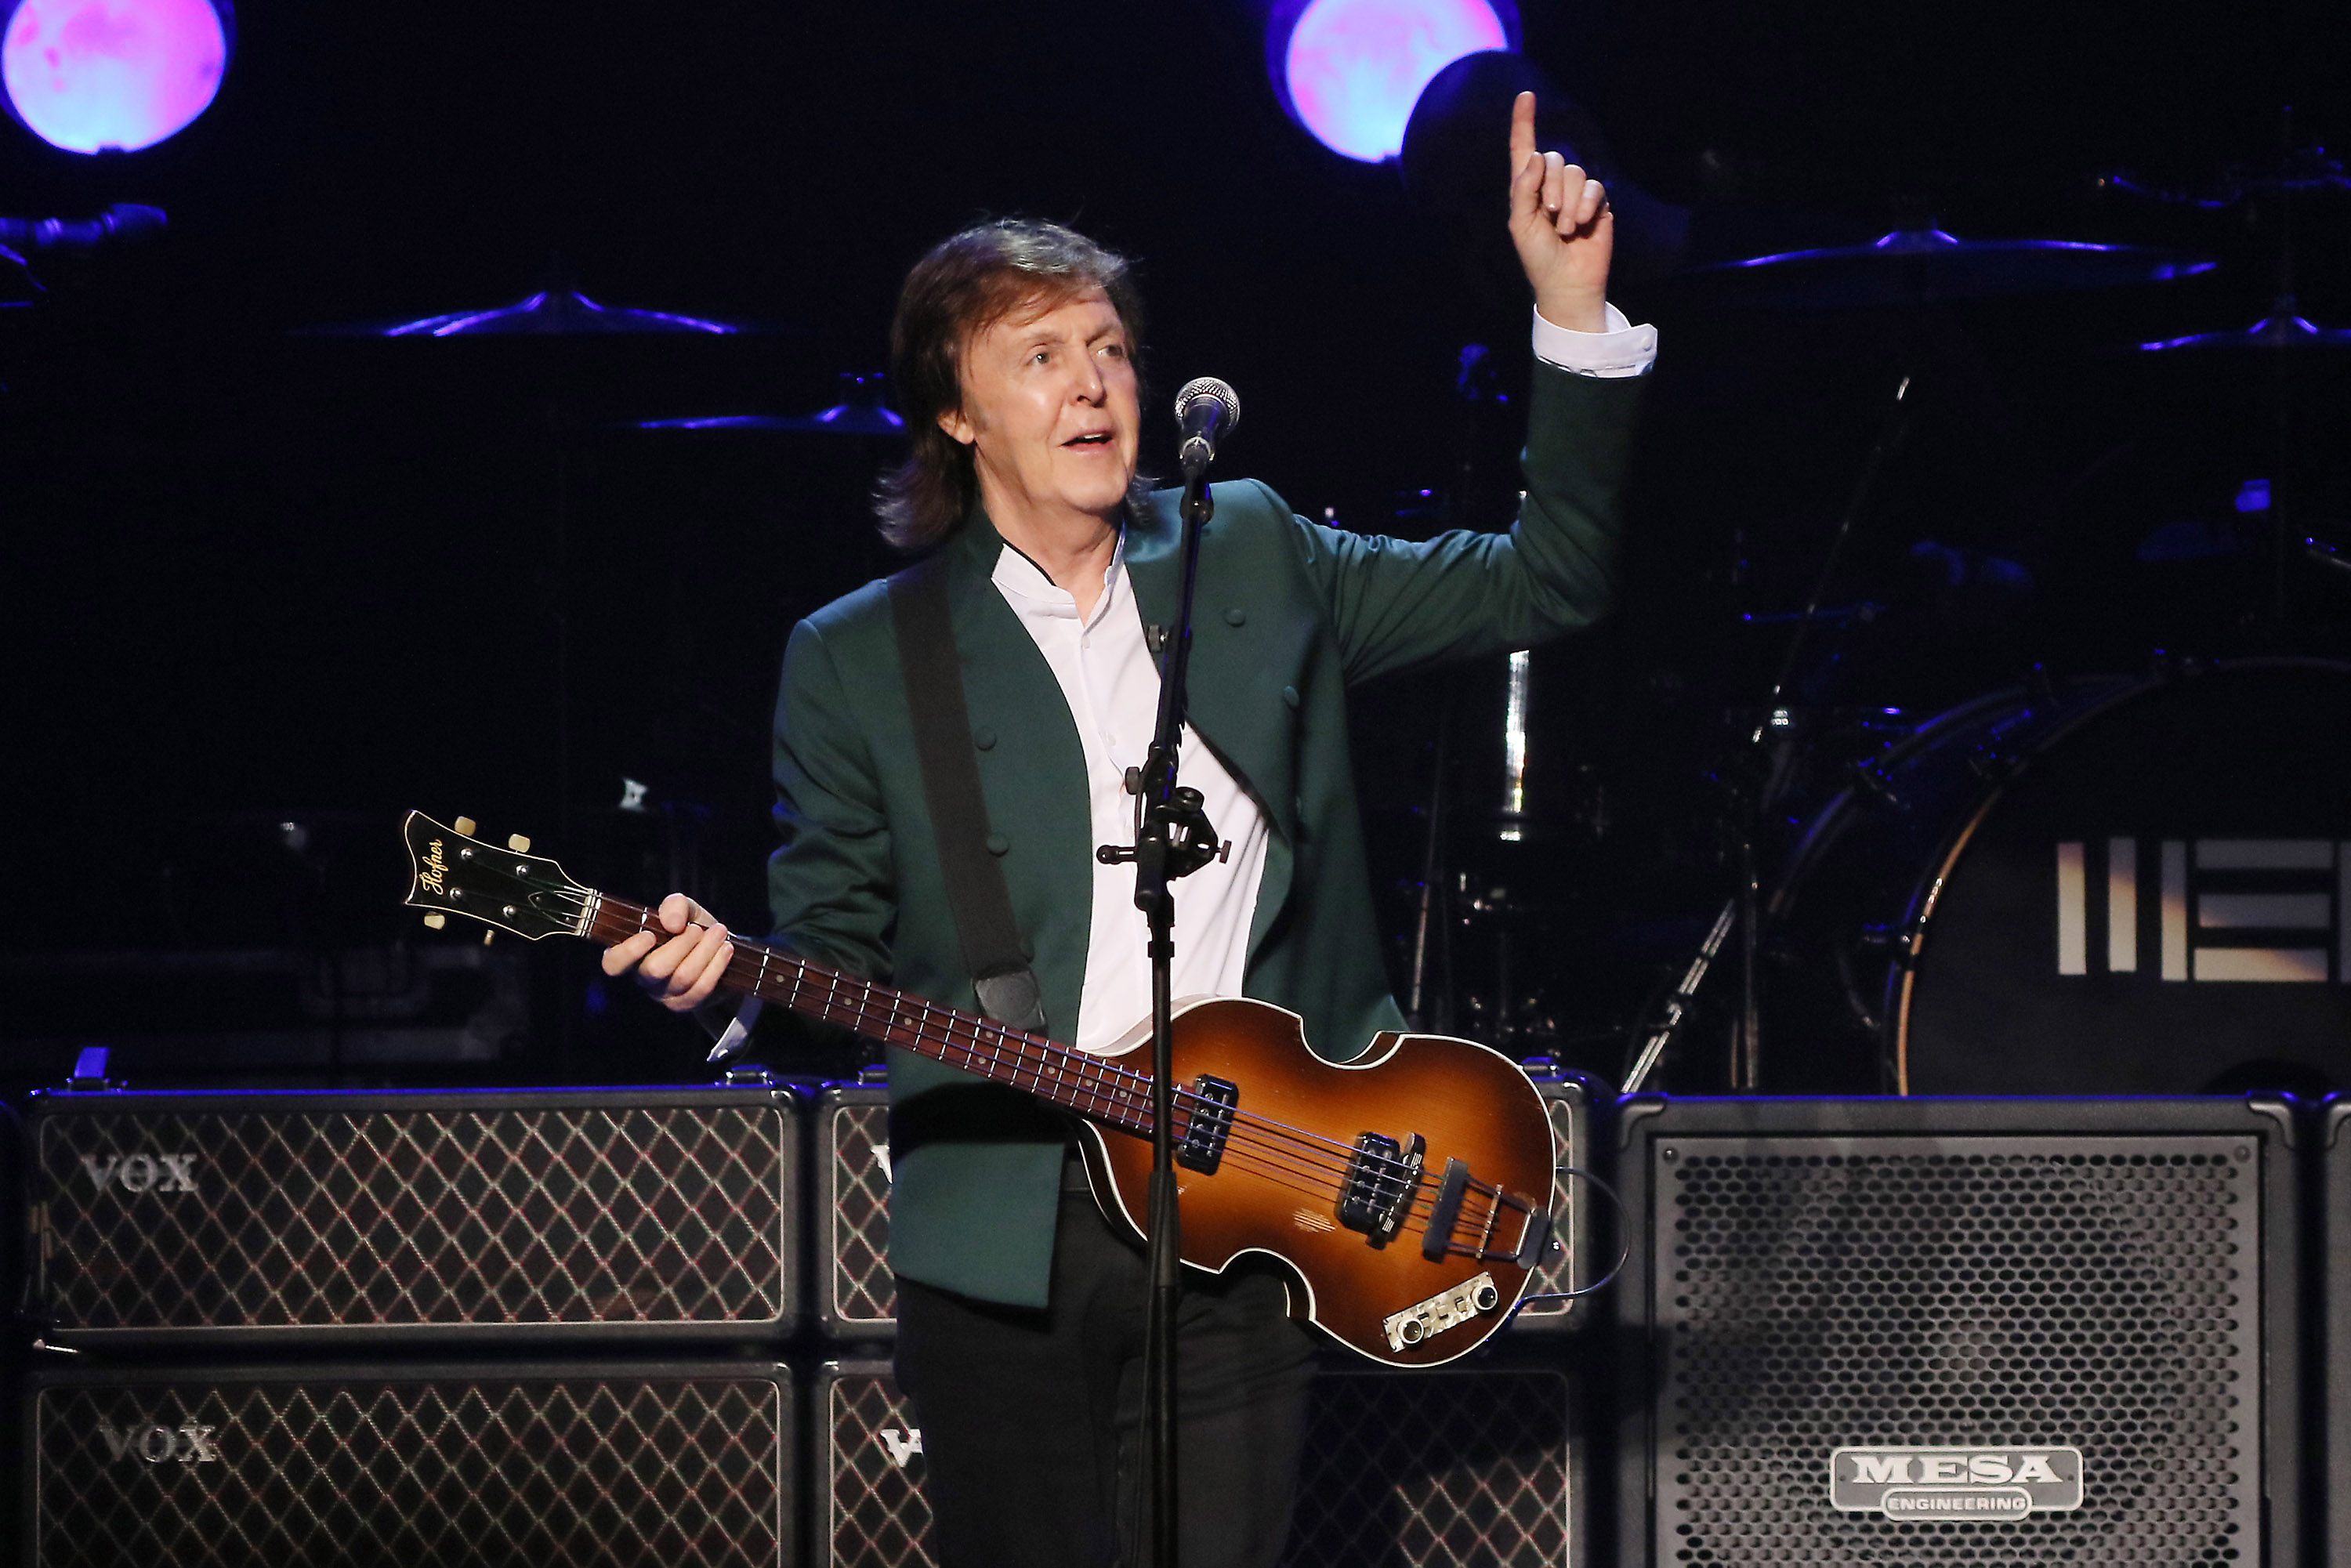 Paul McCartney performs live at the Budokan on April 28, 2015 in Tokyo. (Ken Ishii—Getty Images)